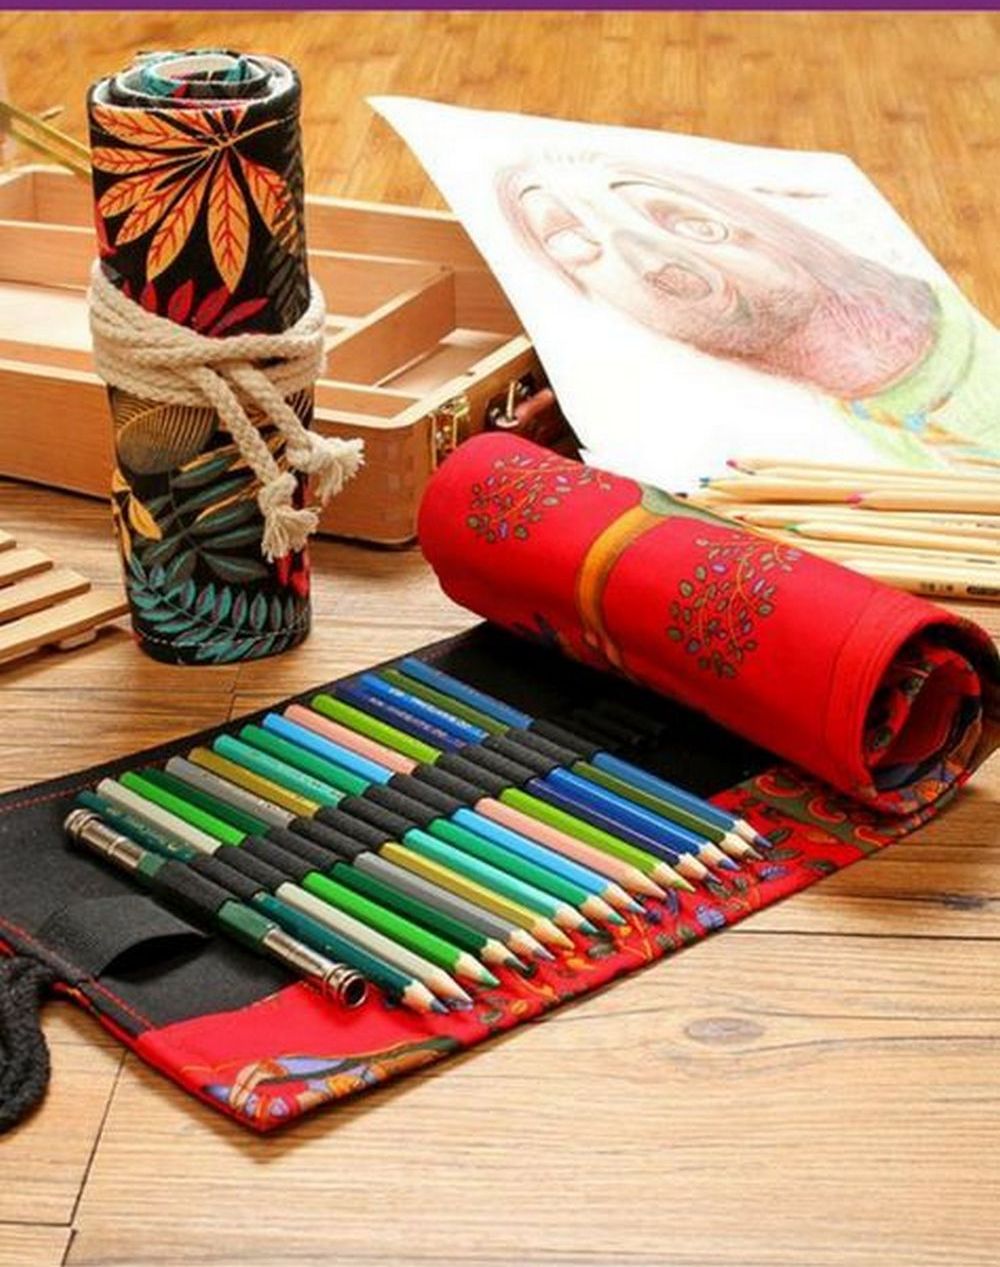 DIY No-Sew Colored Pencil Roll  4 Easy Steps - Craft projects for every  fan!